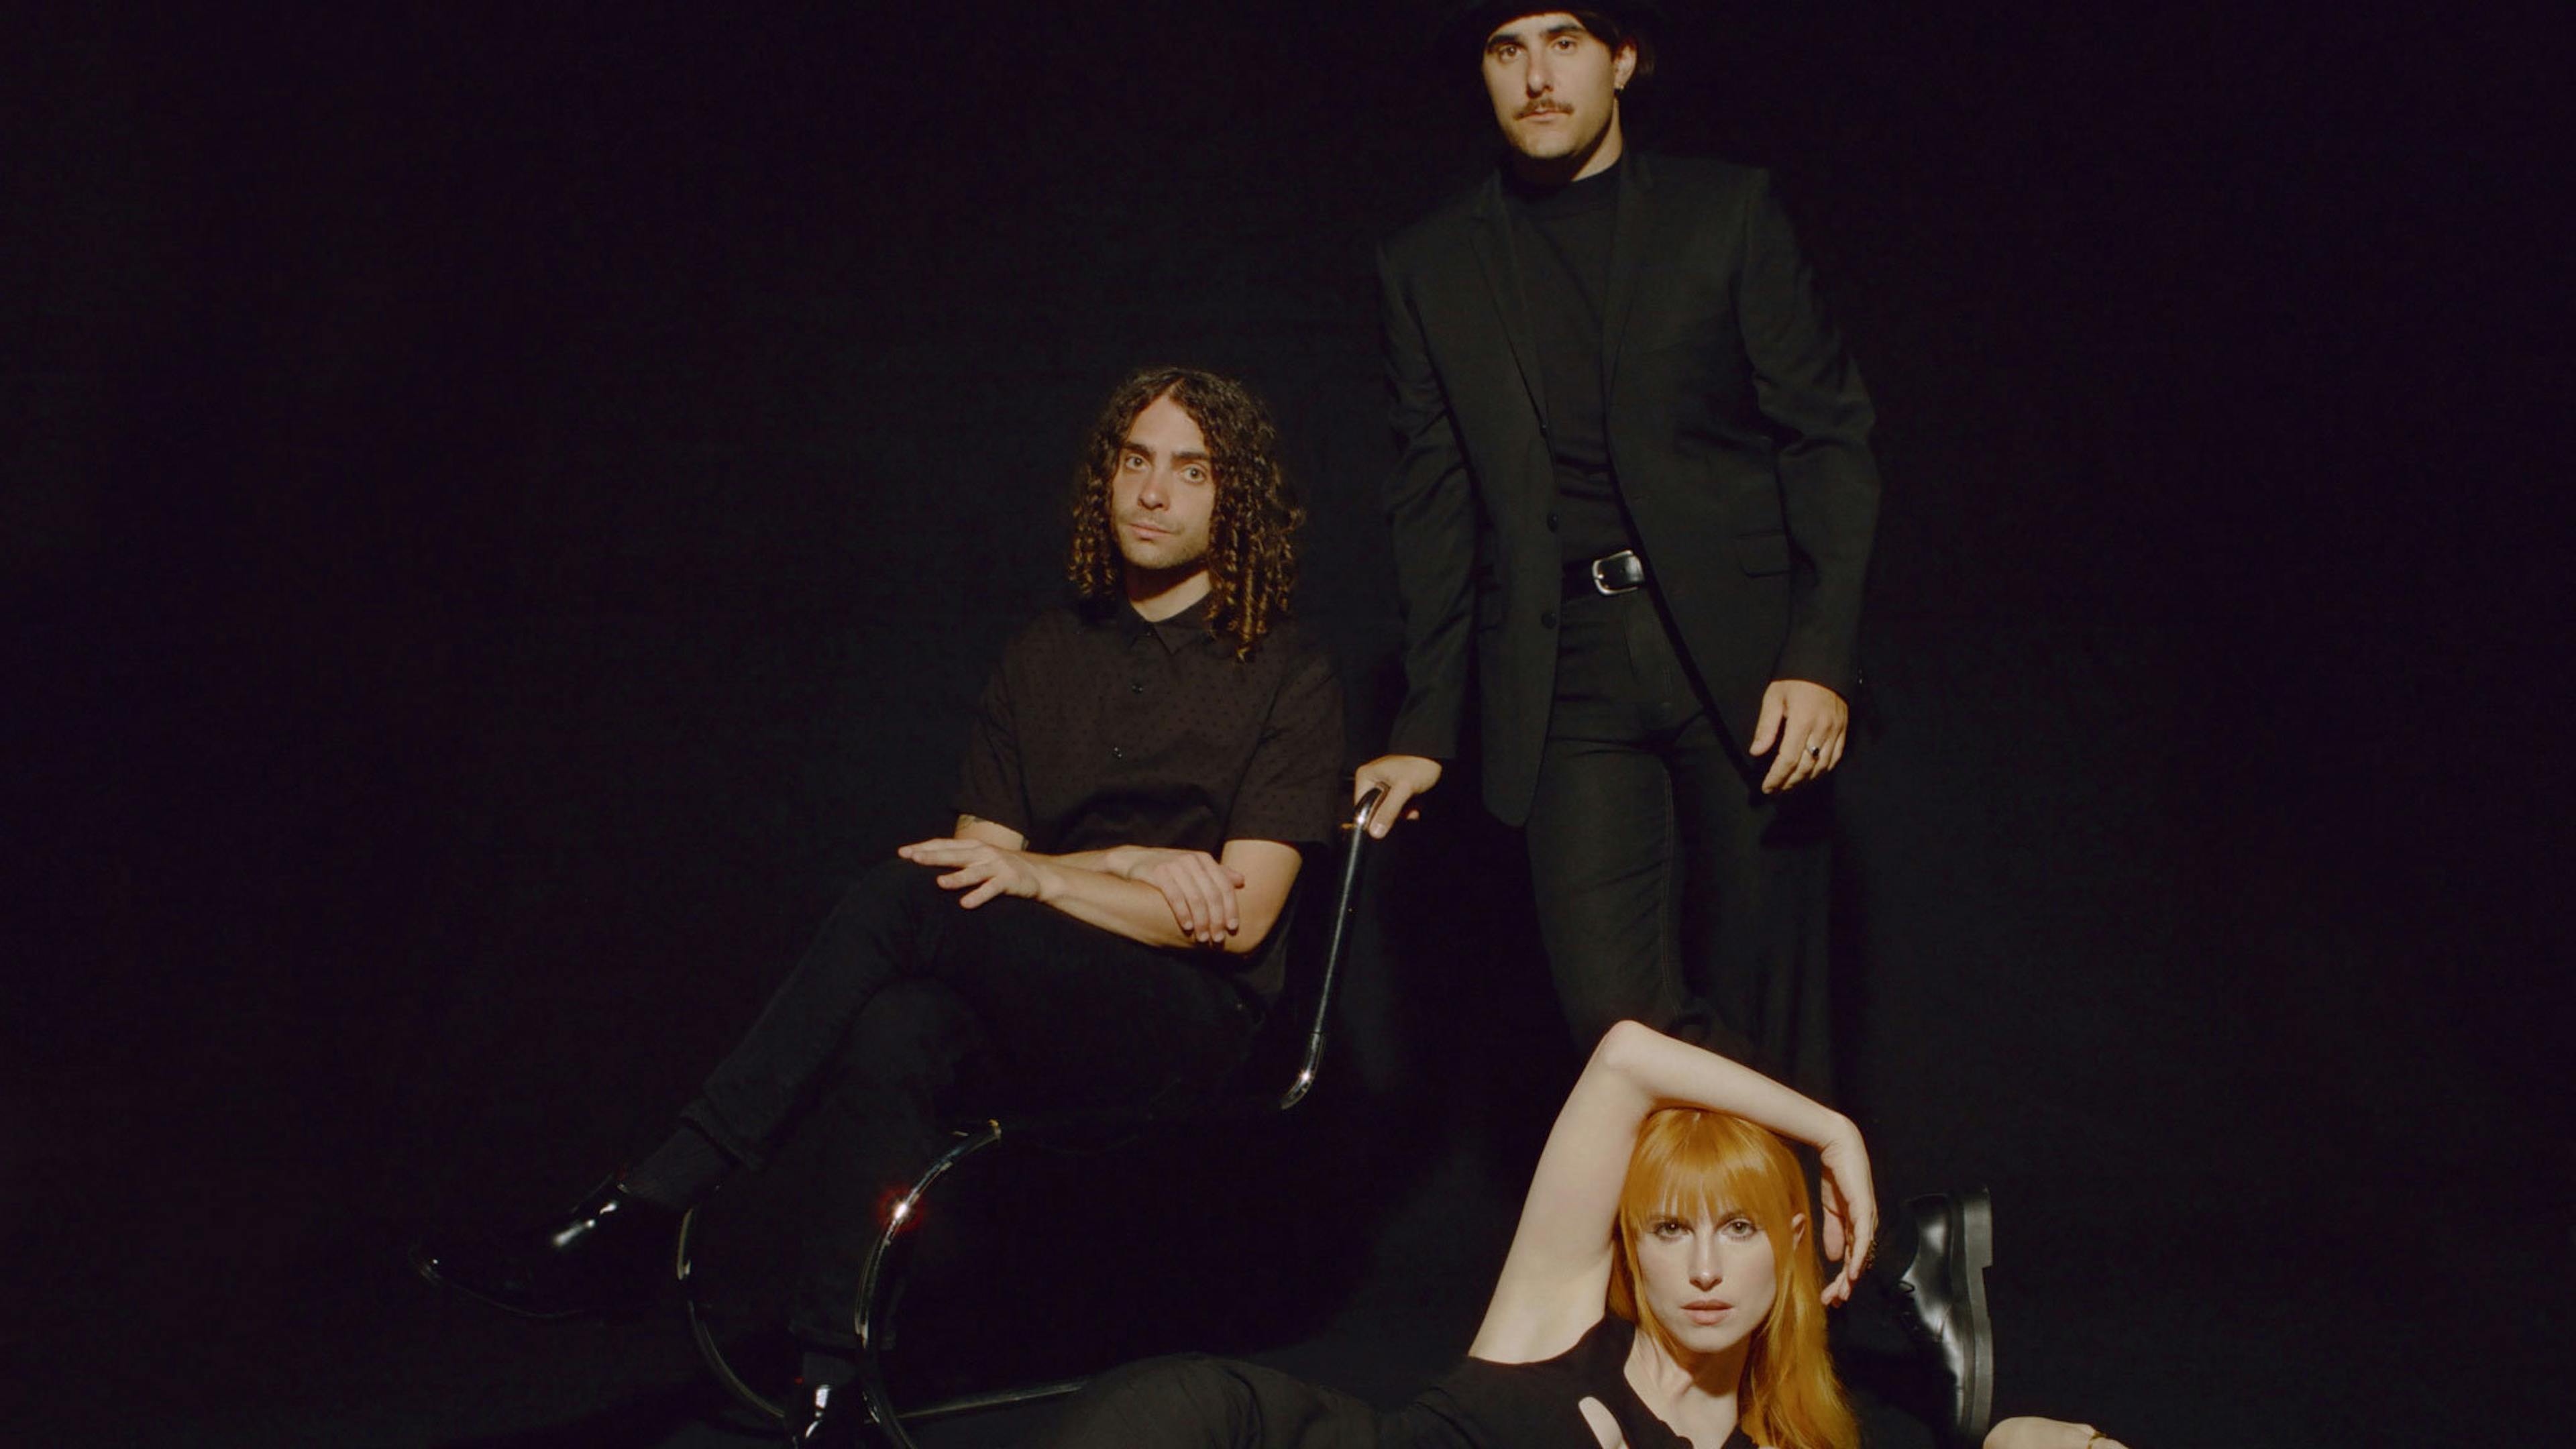 Paramore have changed their 2013 self-titled album cover